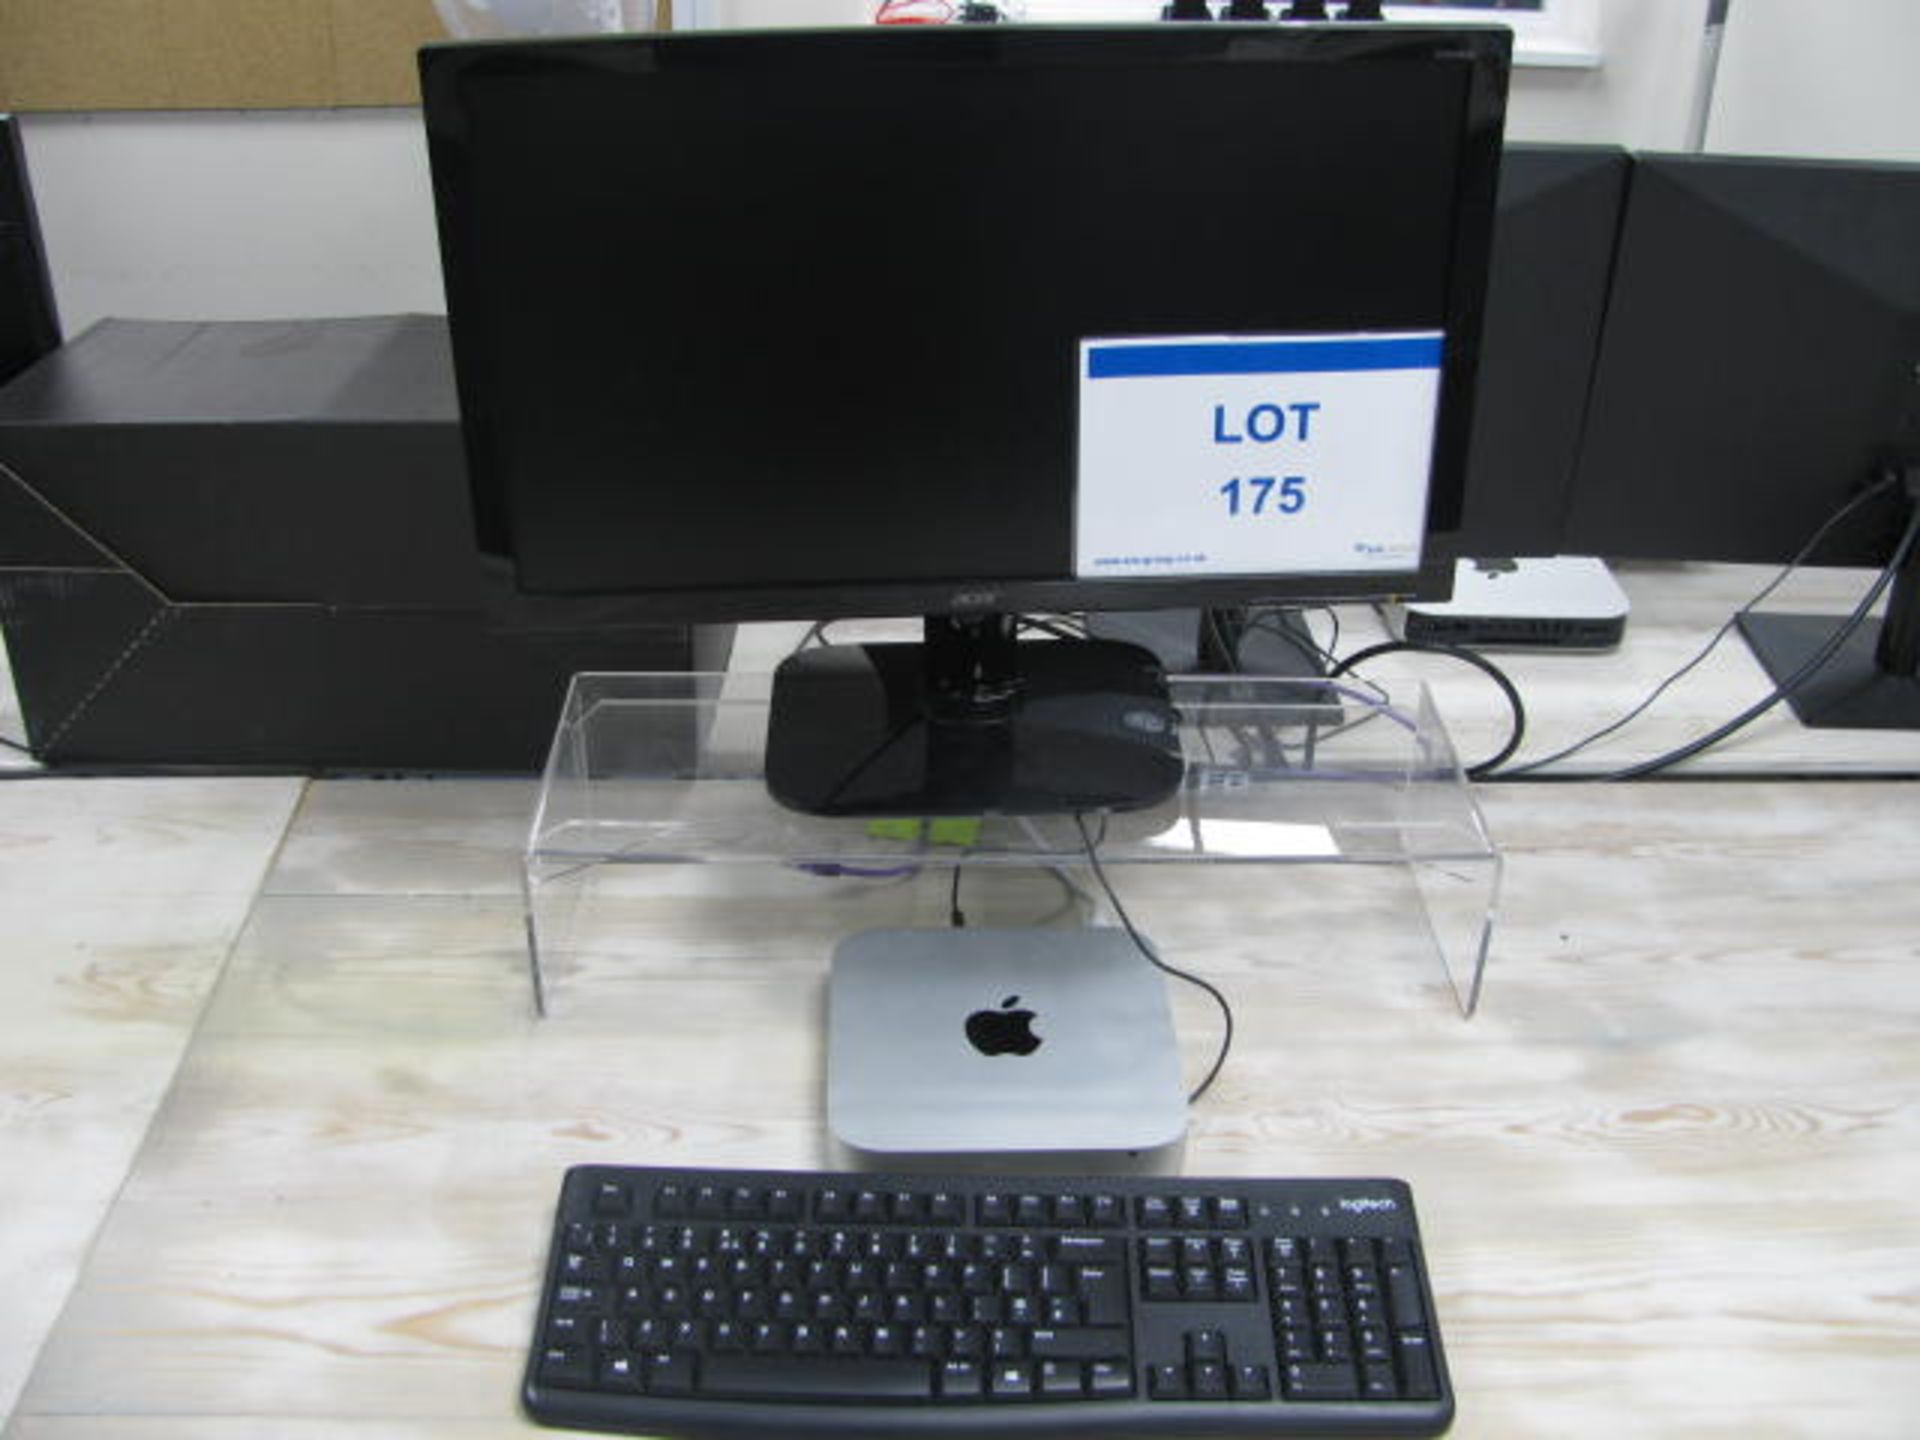 Apple Mac Mini base unit with Acer flat screen monitor, keyboard and mouse